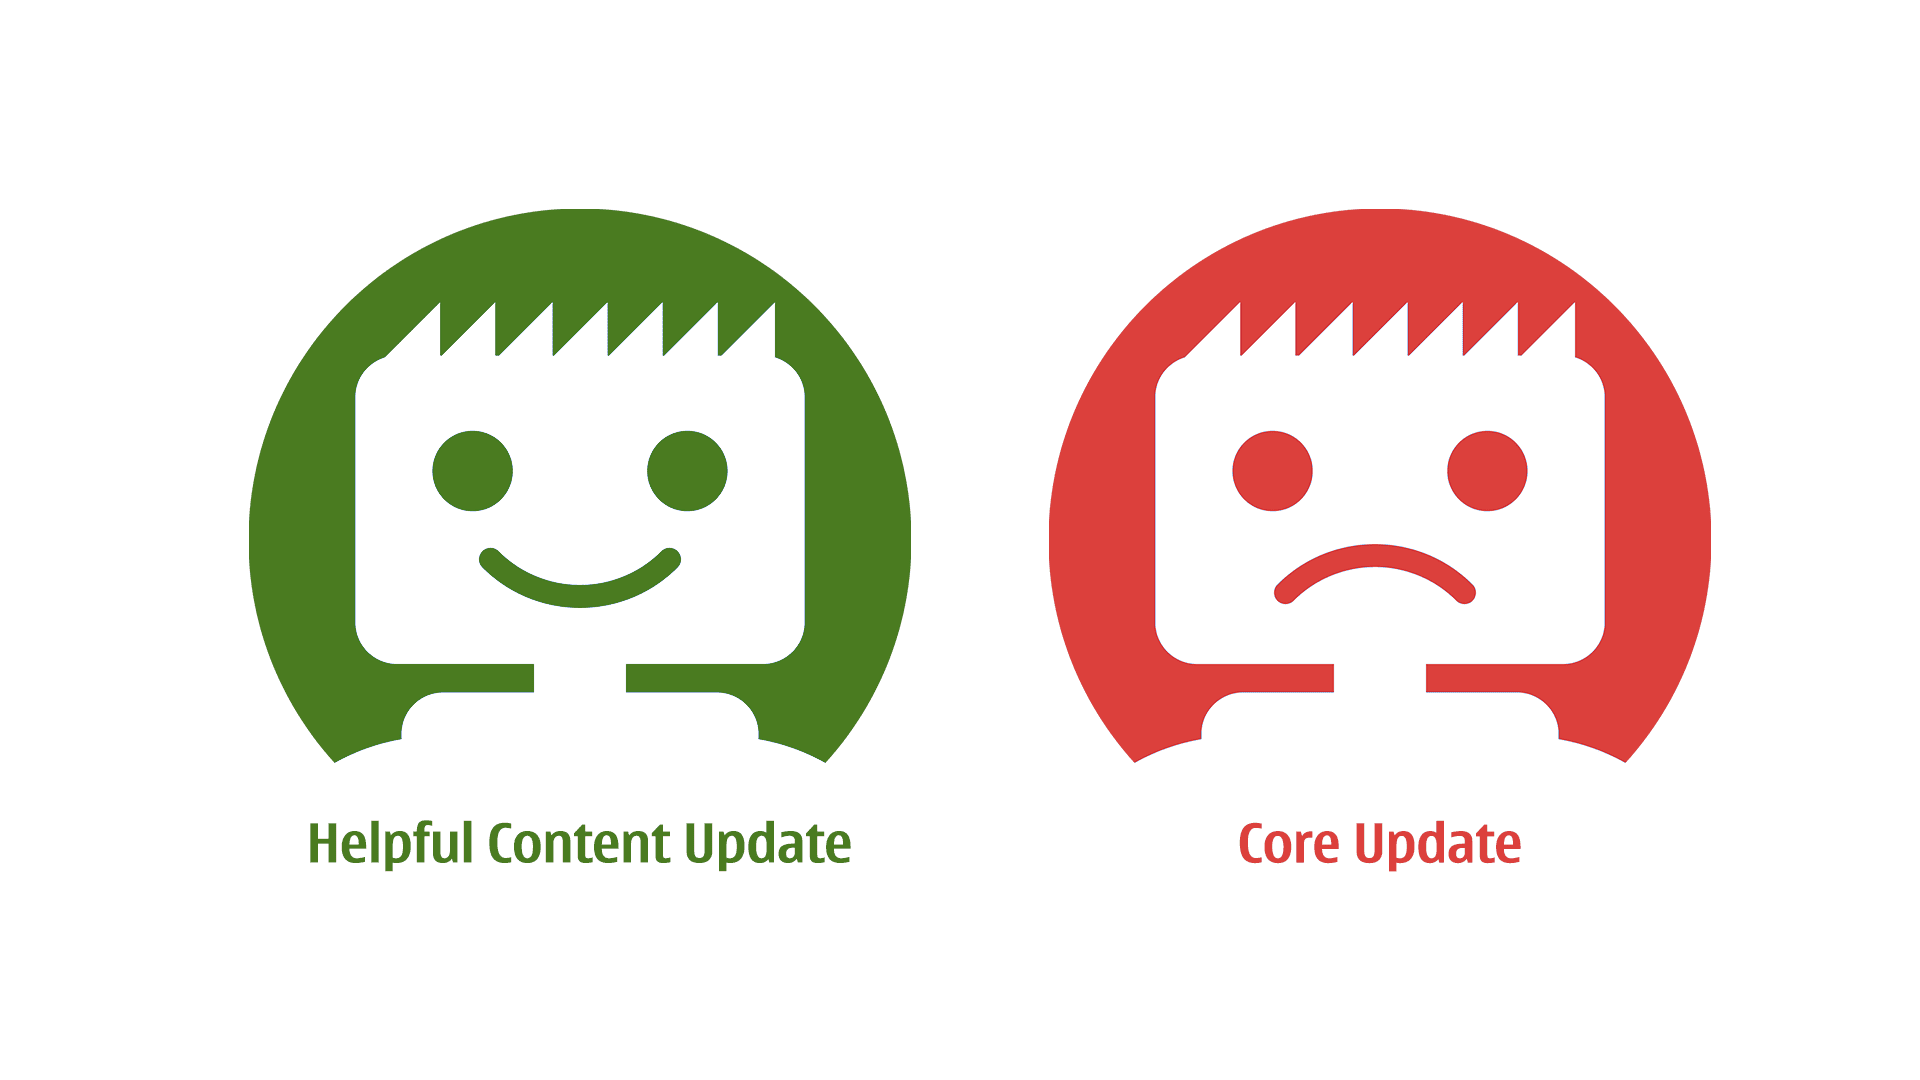 Where Helpful Content Update did not do as much, Core update did!